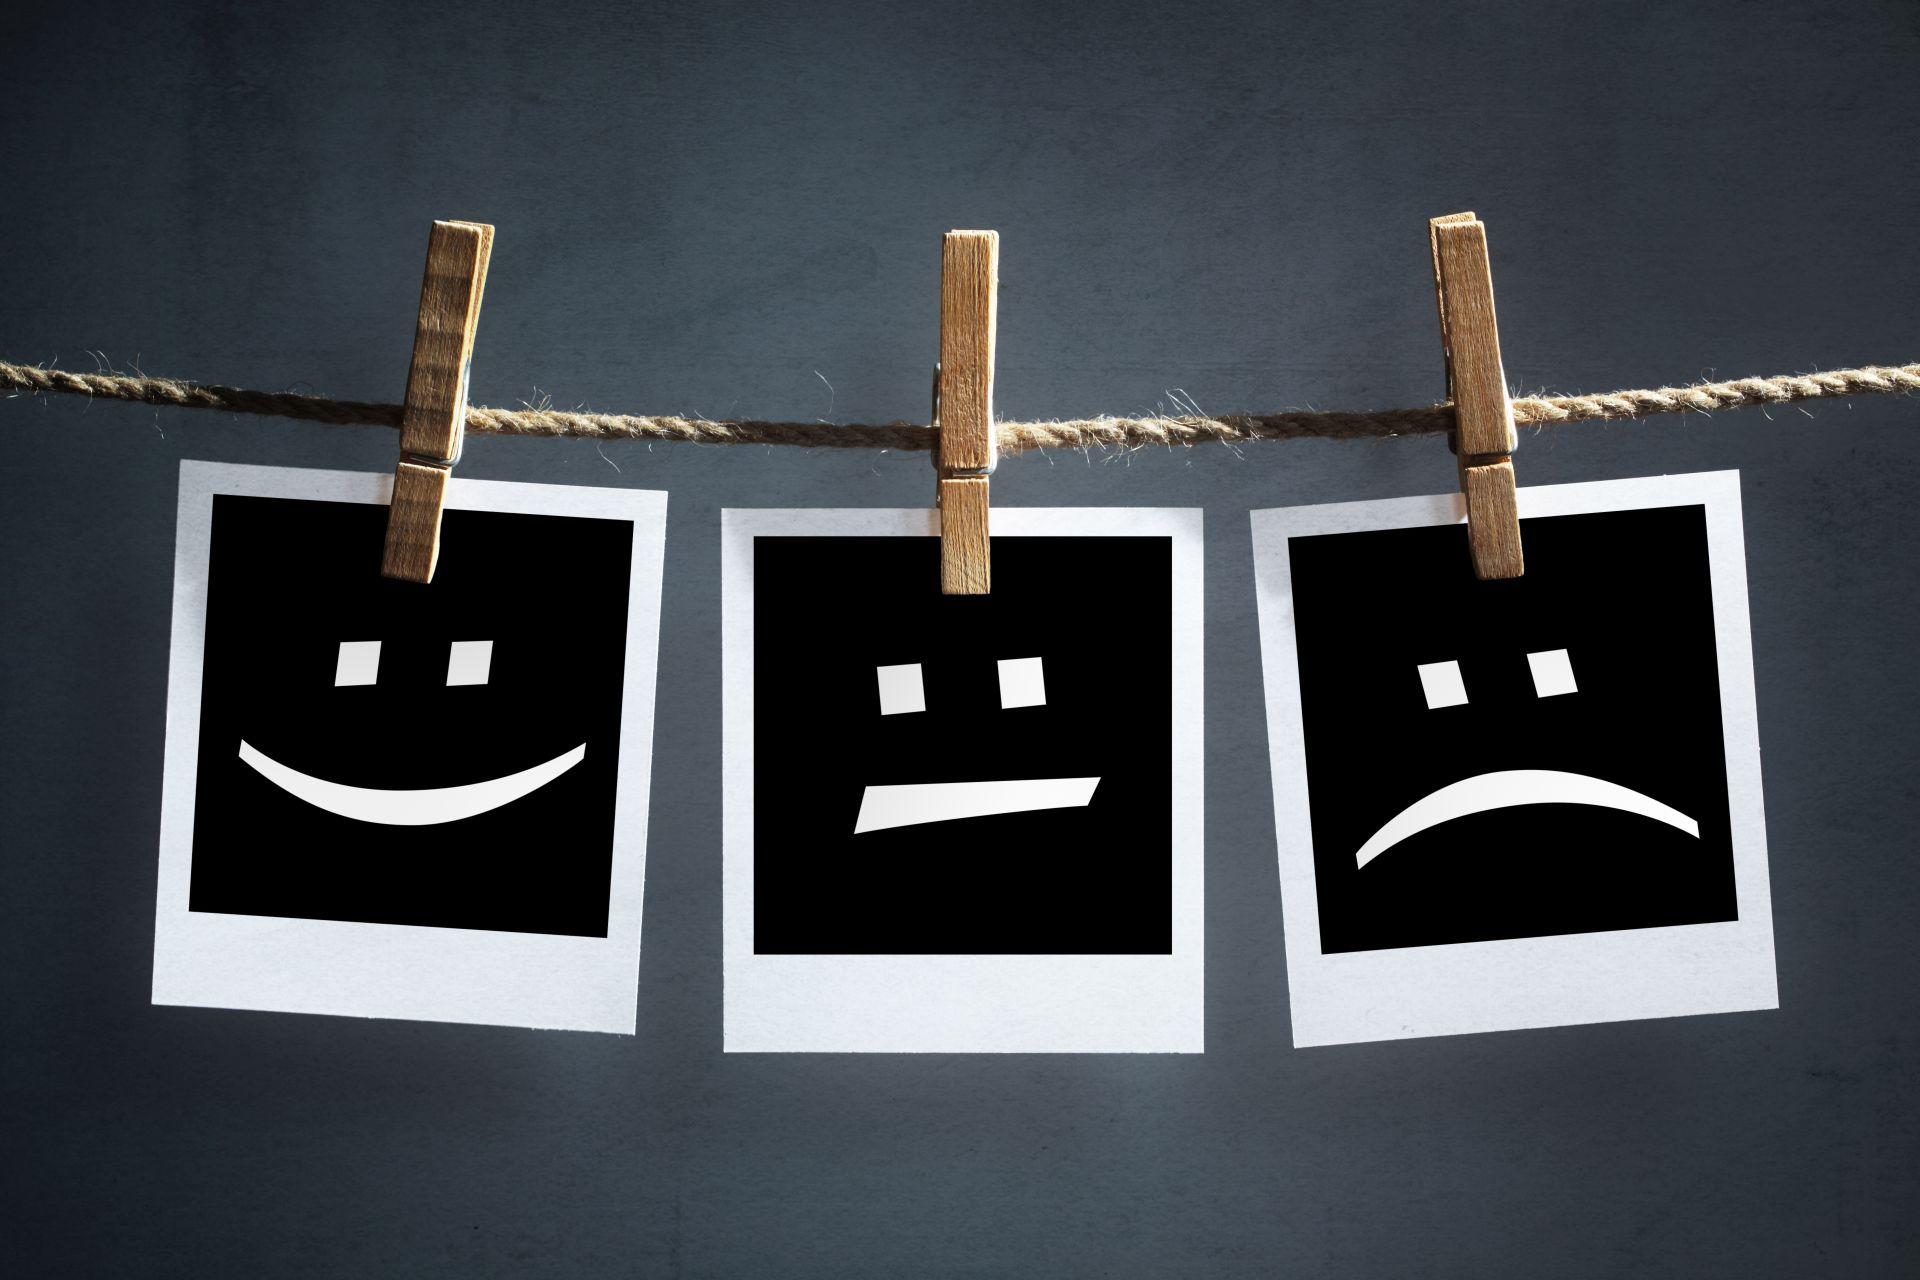 Happy, sad and neutral emoticons on instant print transfer photographs hanging on a clothesline